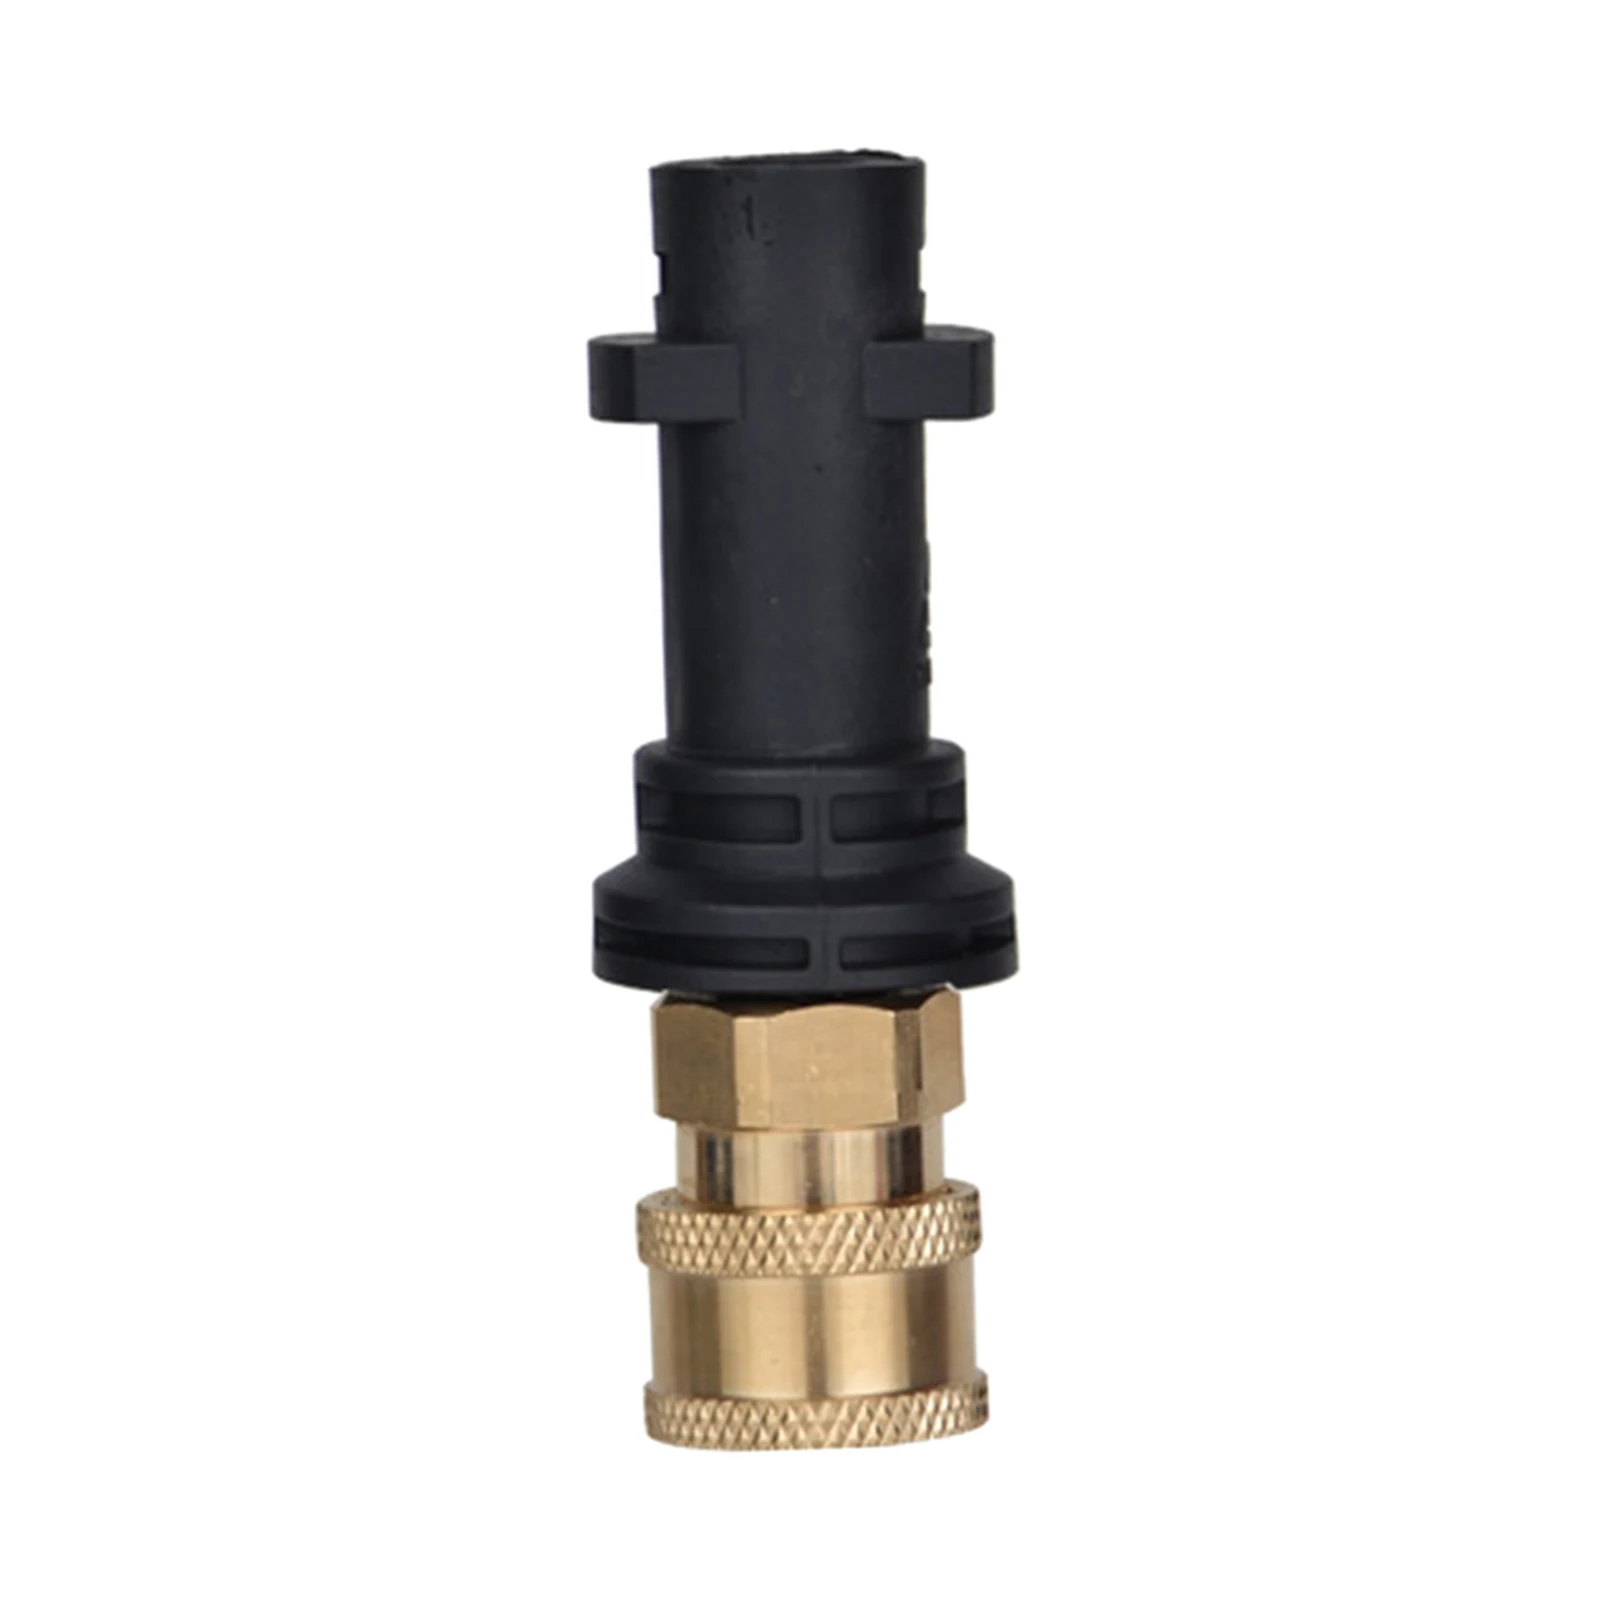 High Pressure Washer Hose Adapter 1/4 Quick Disconnect Foam Nozzle Power Washer Outlet Fitting Pressure Washer Hose Accessory